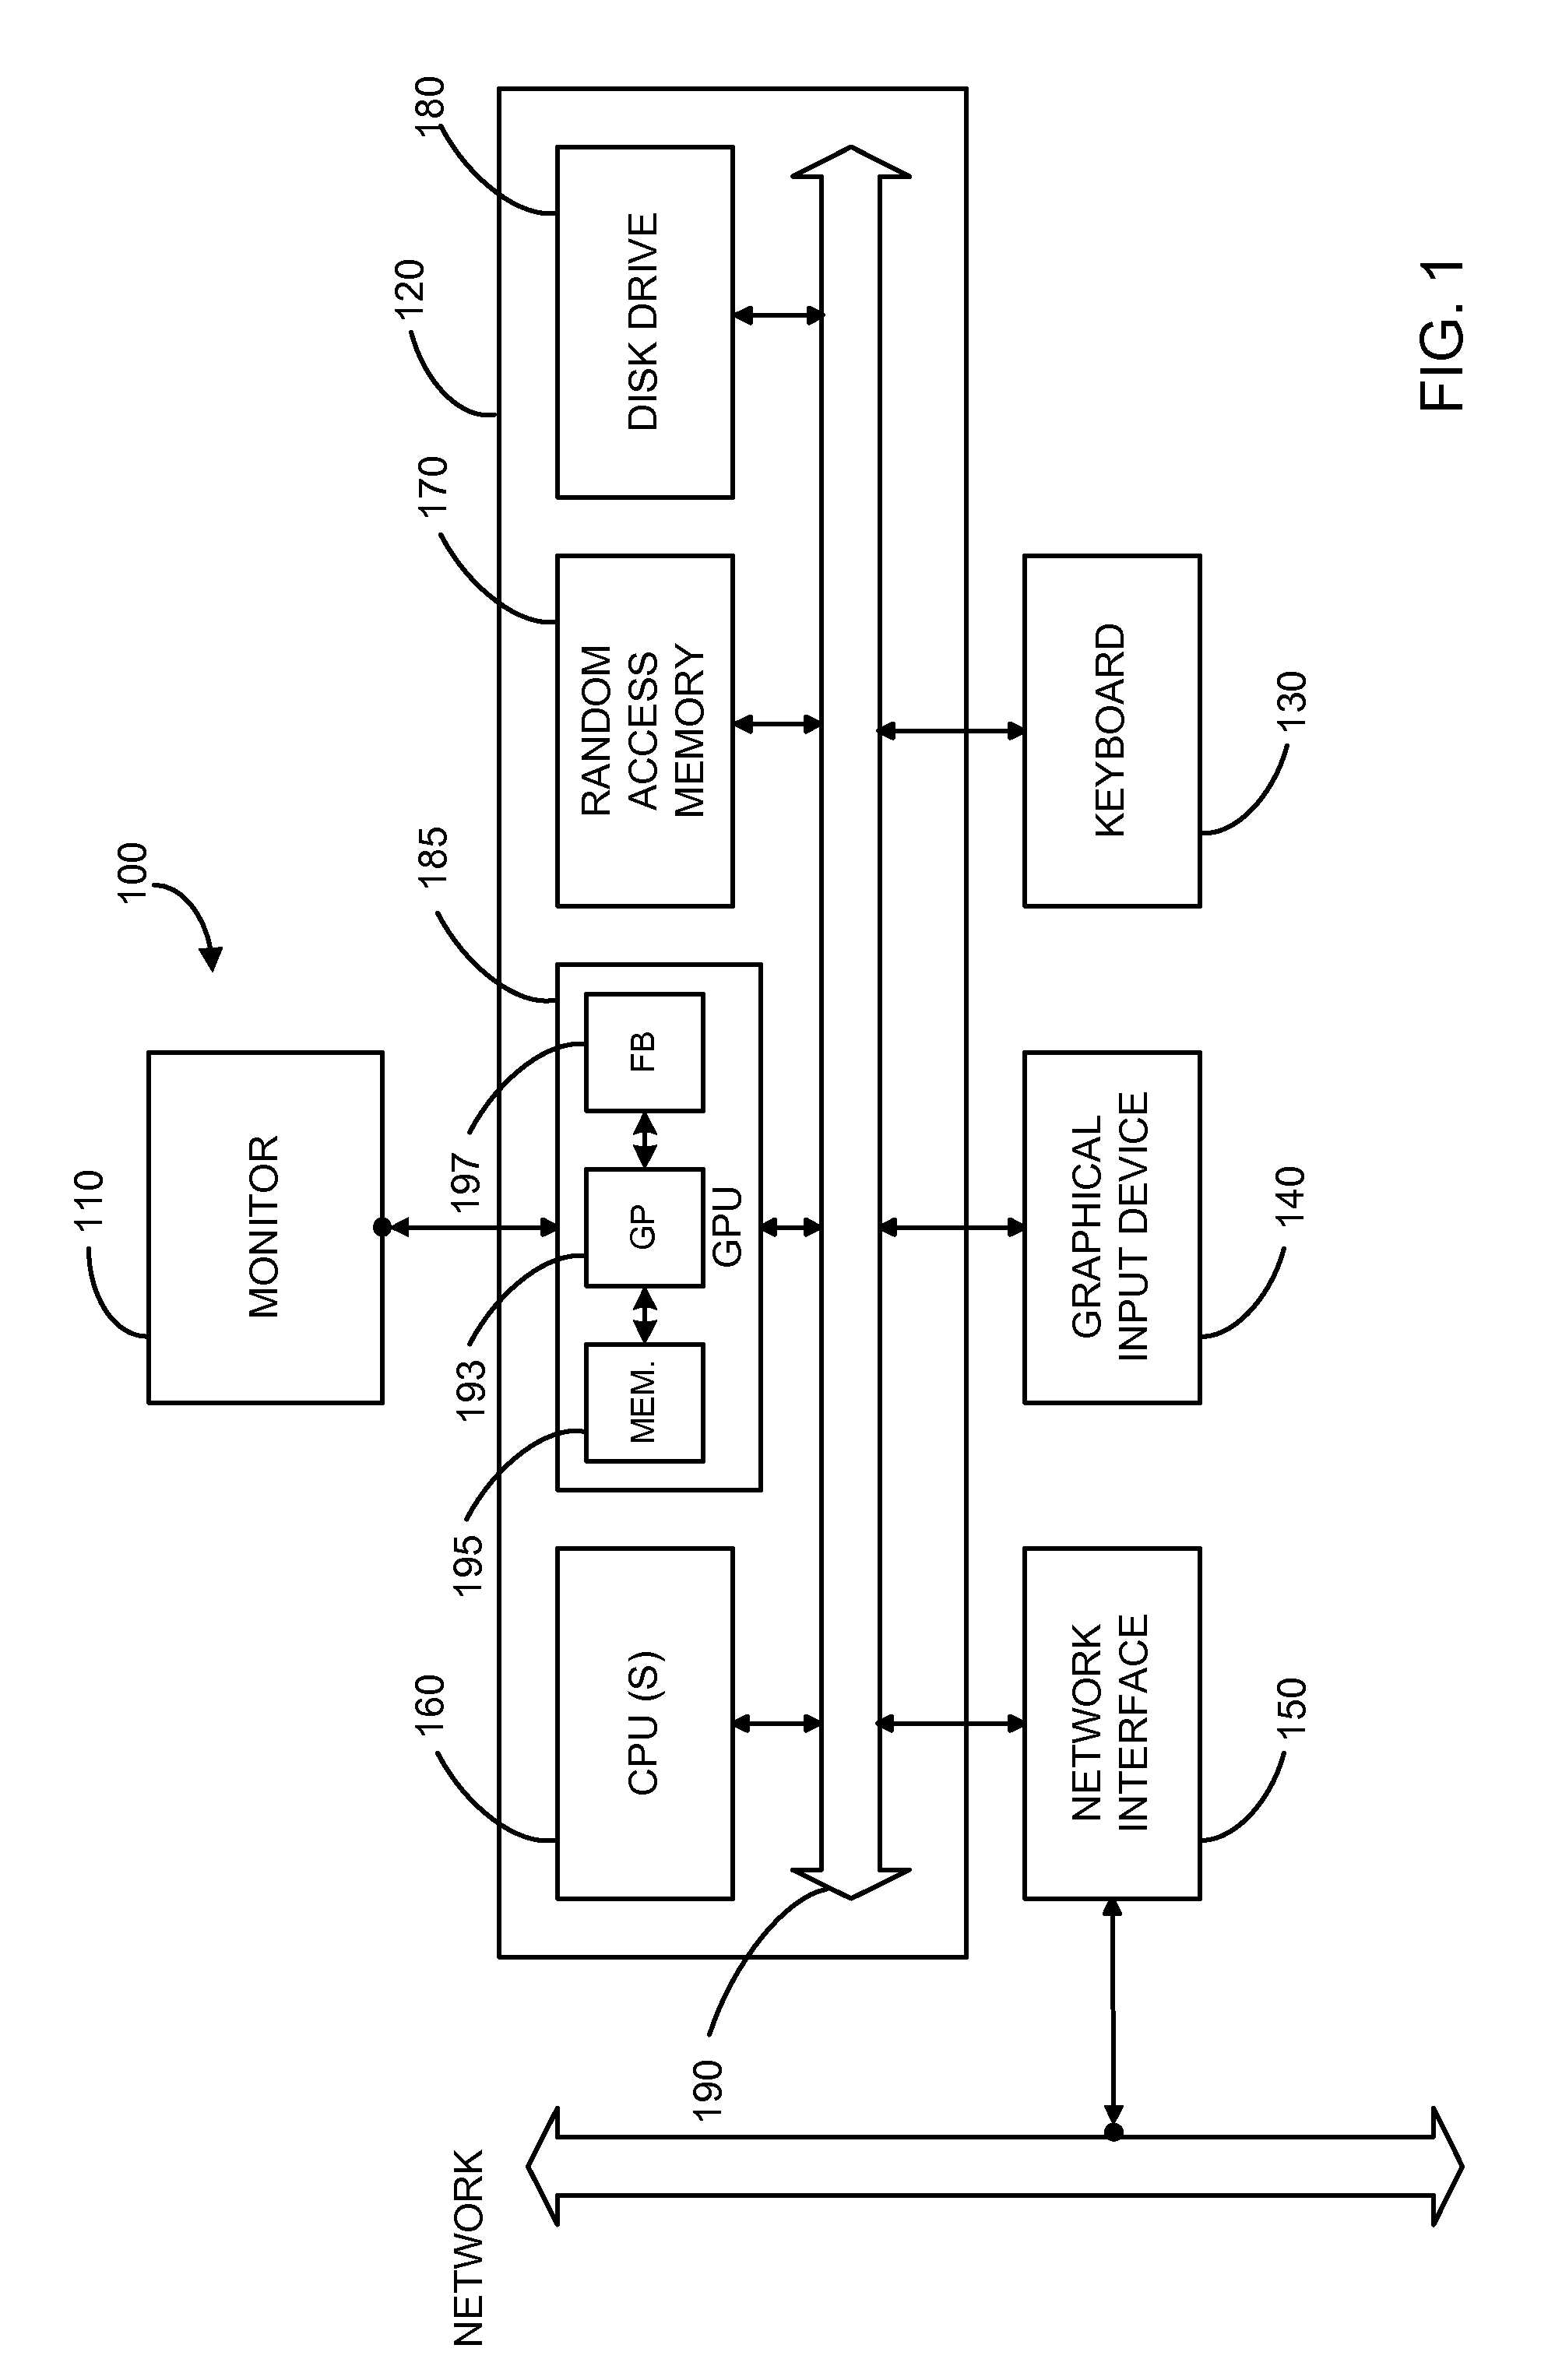 Methods and apparatus for auto-scaling properties of simulated objects